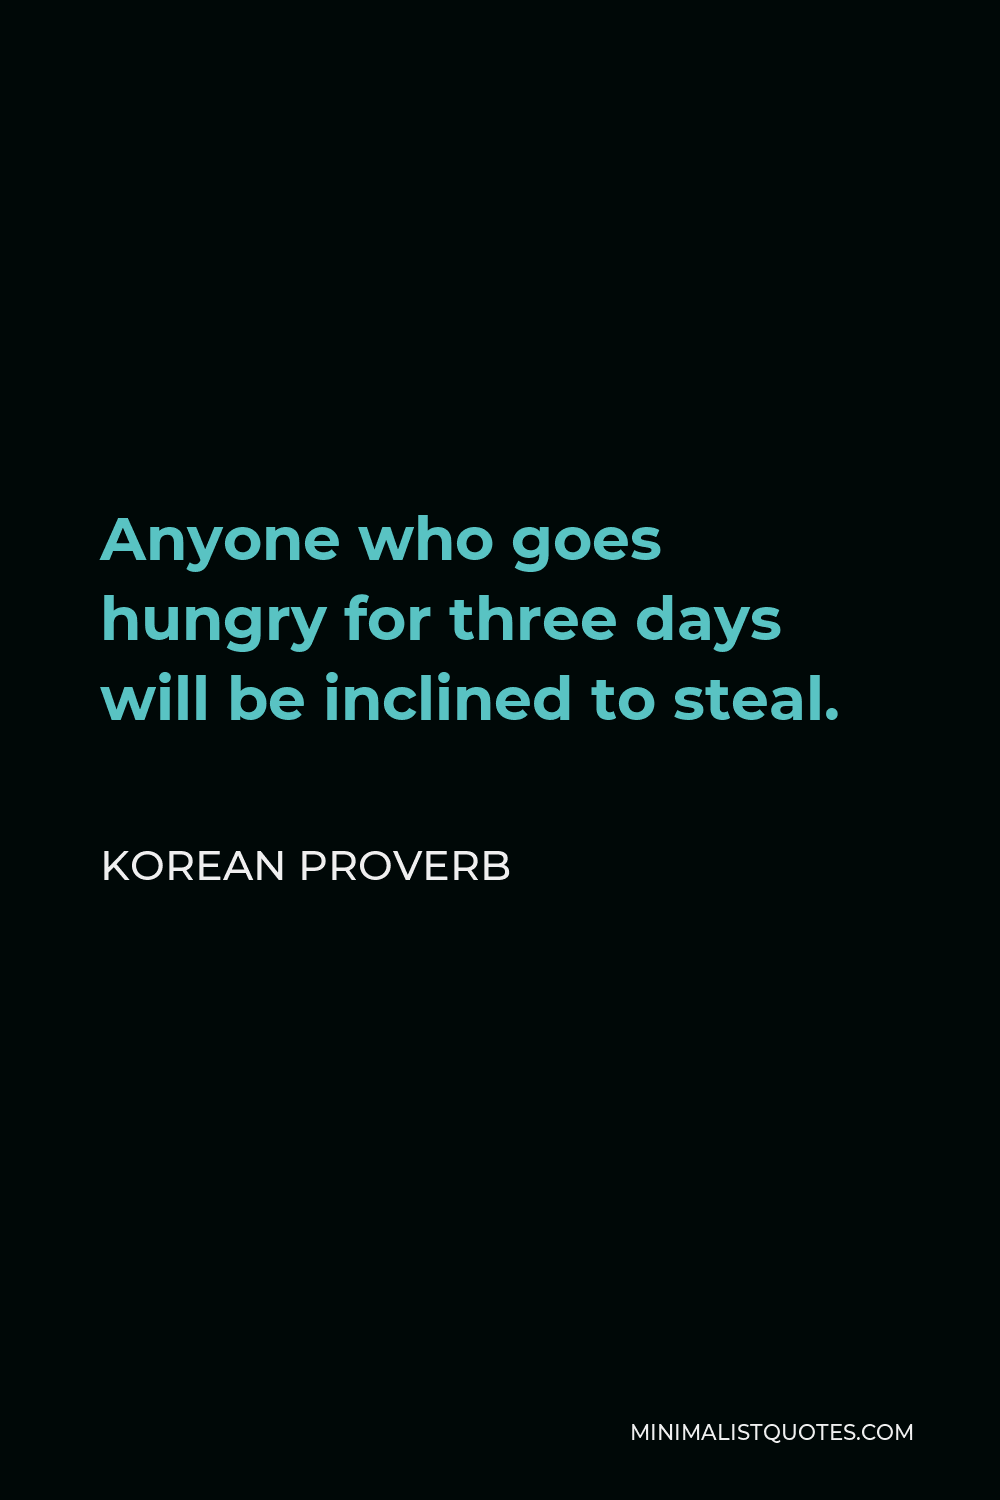 Korean Proverb Quote - Anyone who goes hungry for three days will be inclined to steal.